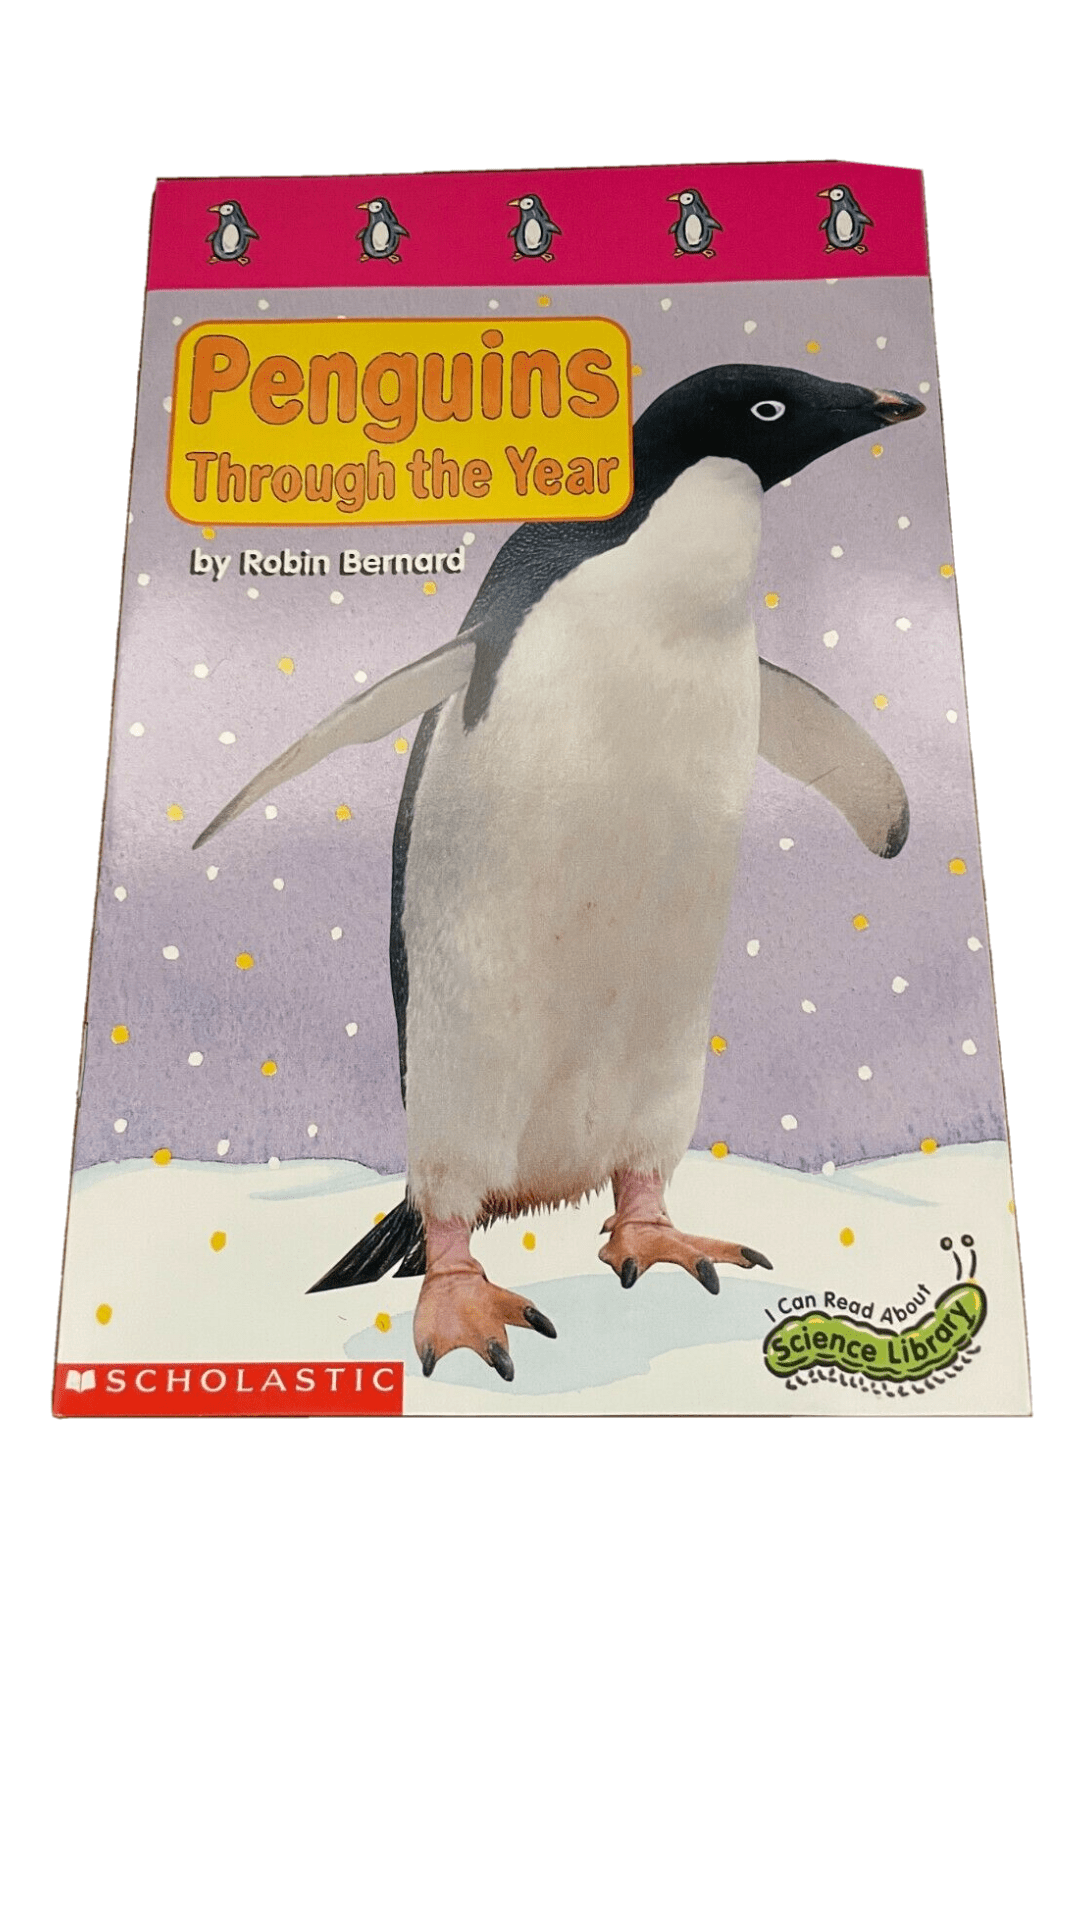 Penguins Through the Year